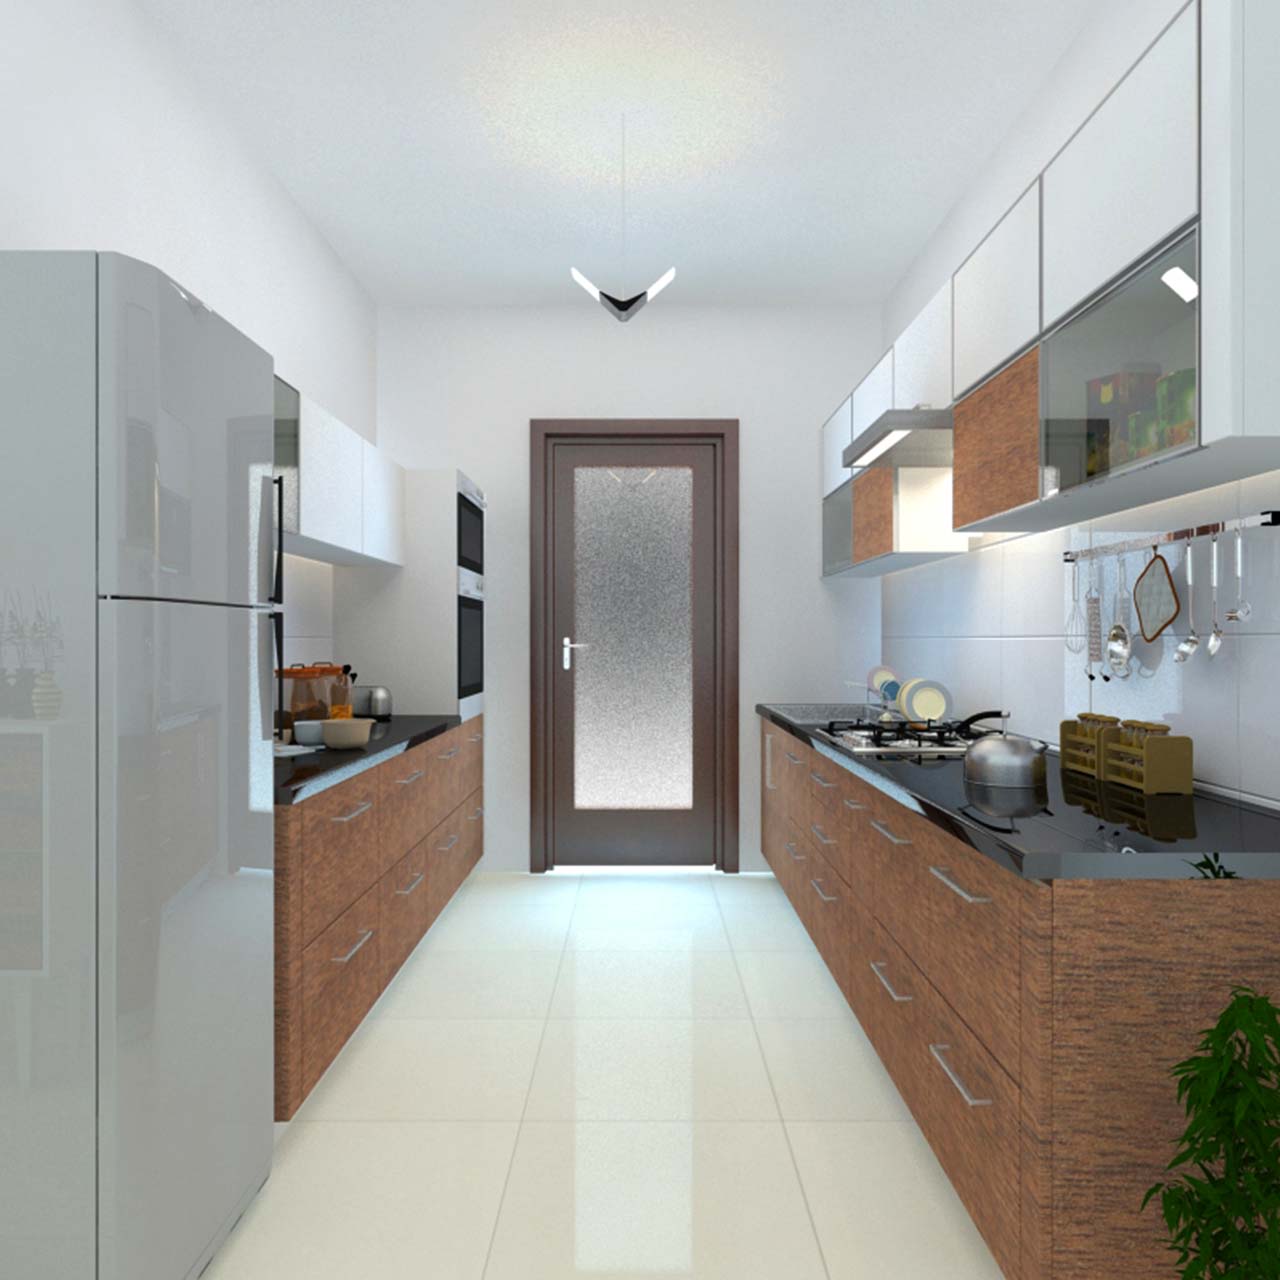 Parallel kitchen layout is a one of types of kitchen layout, this parallel kitchen design for small spaces